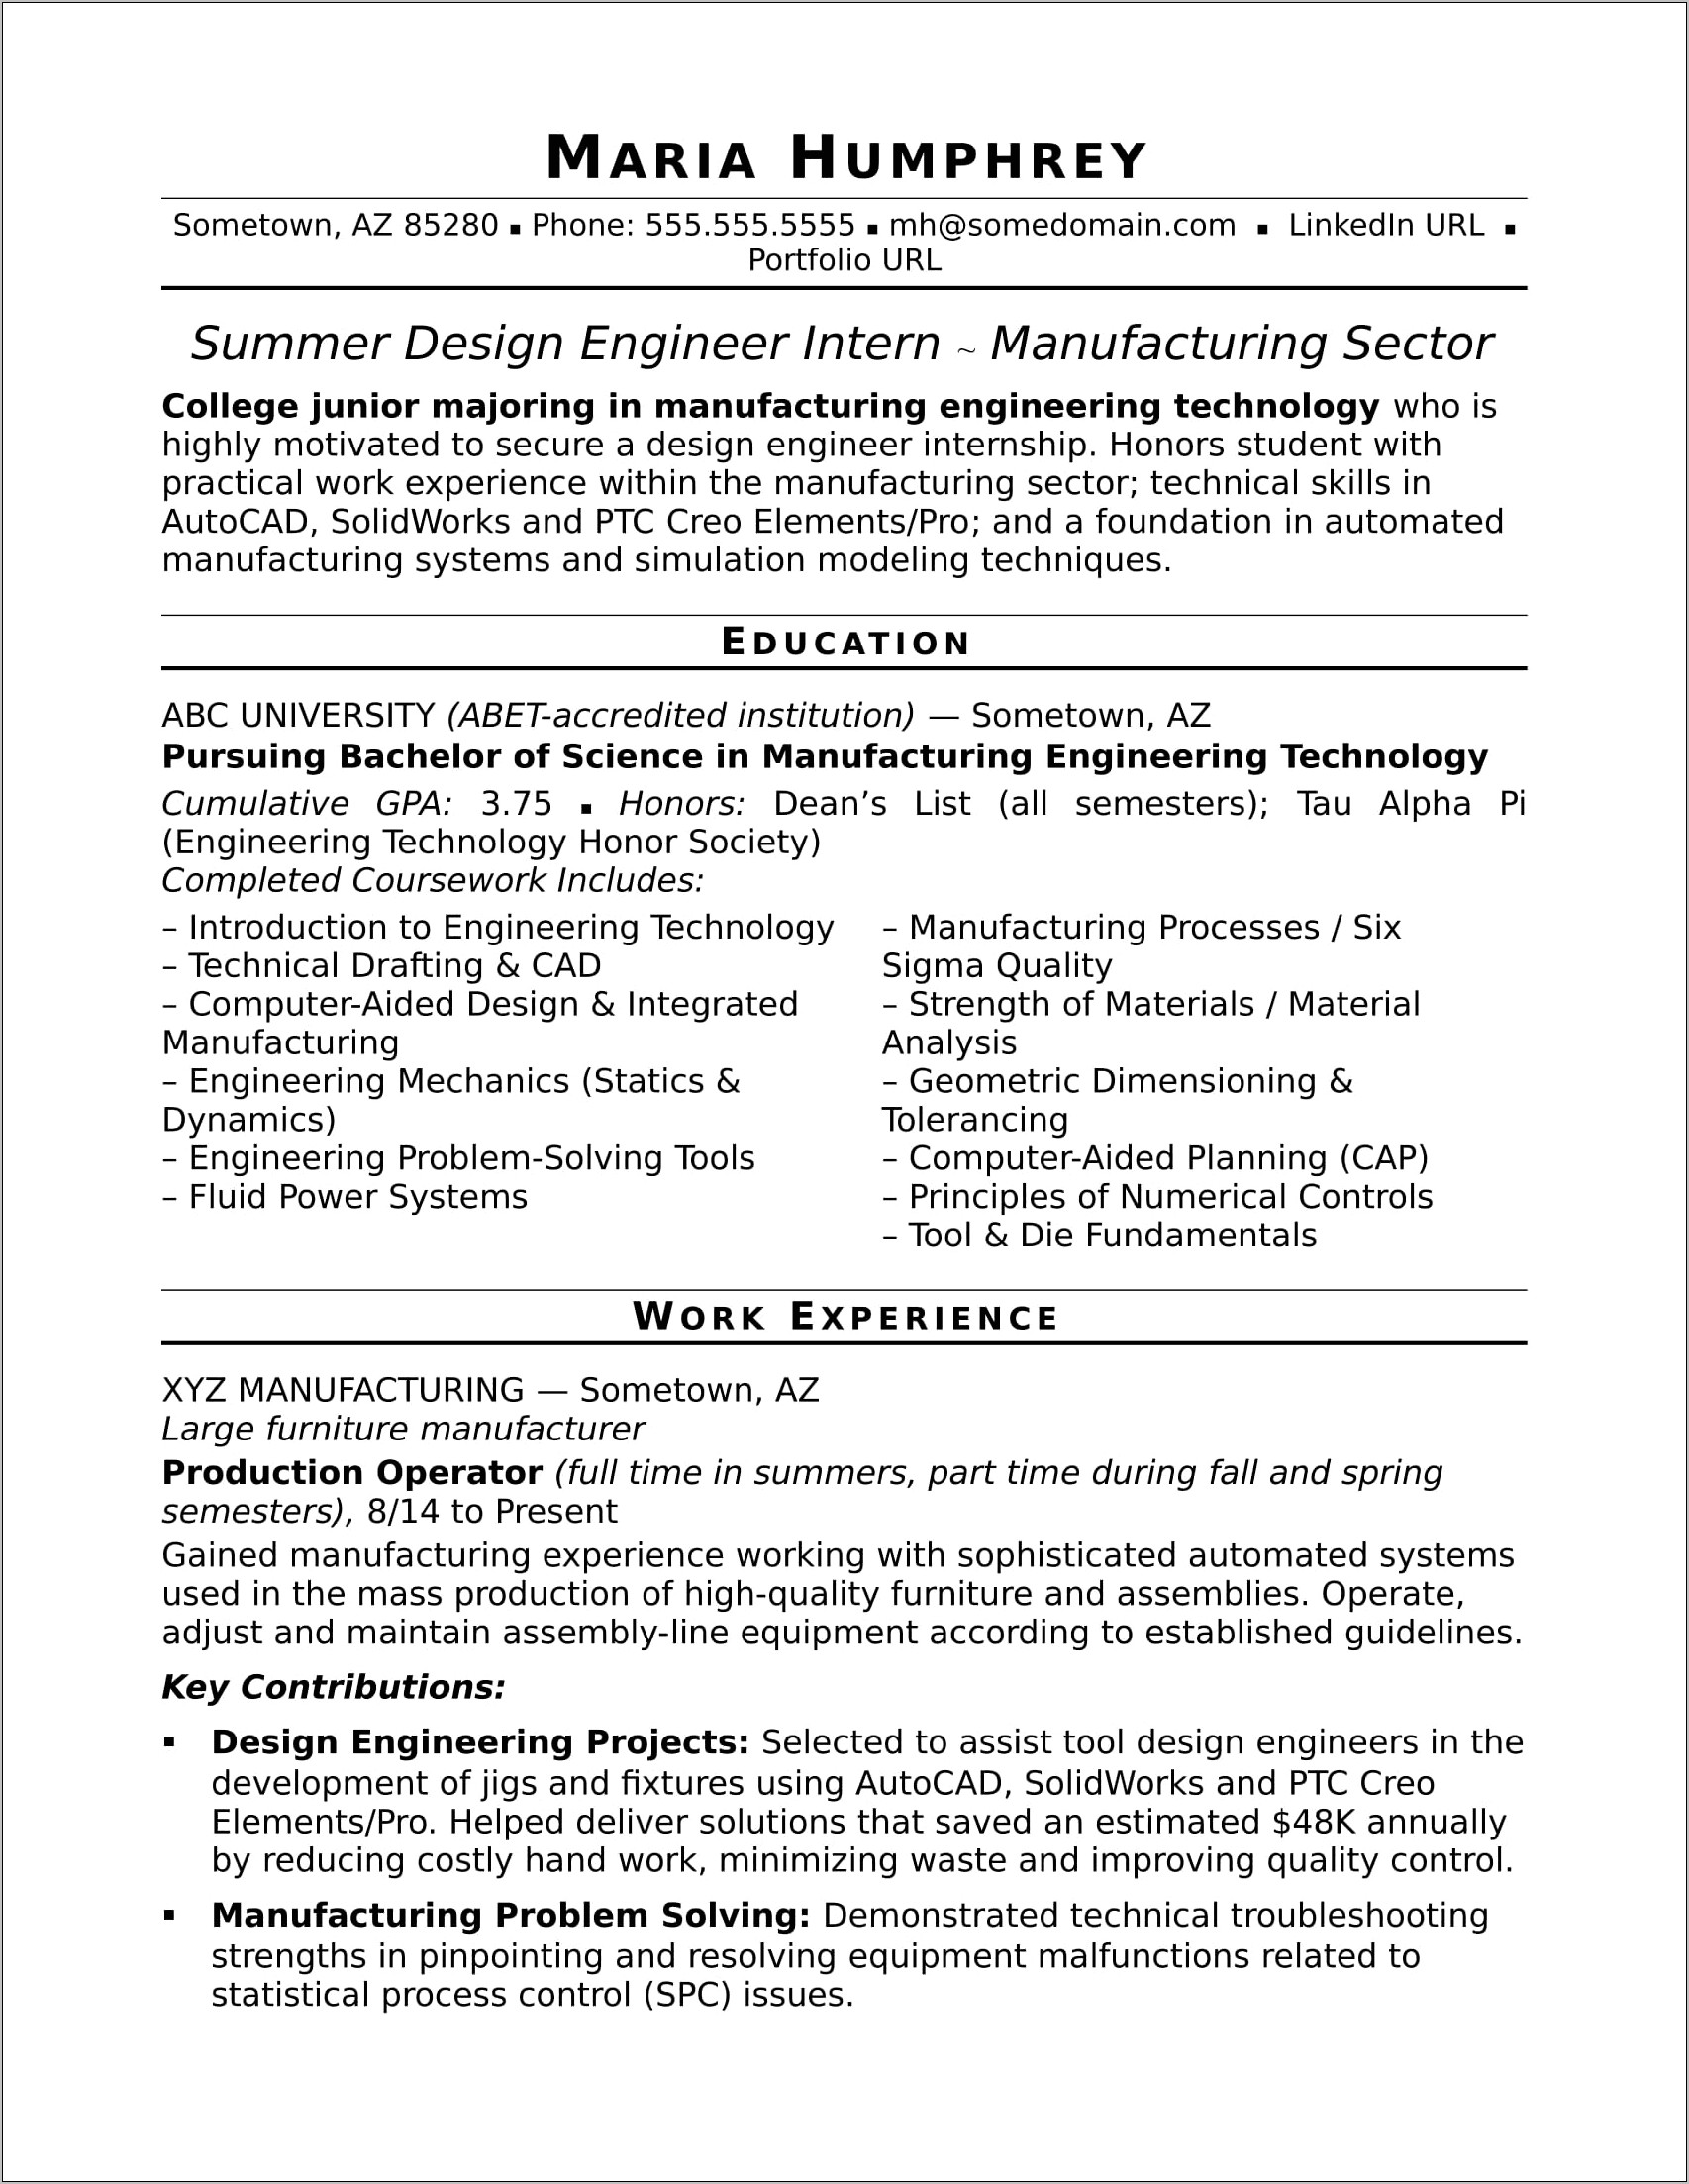 Example Engineer Resume Entry Level